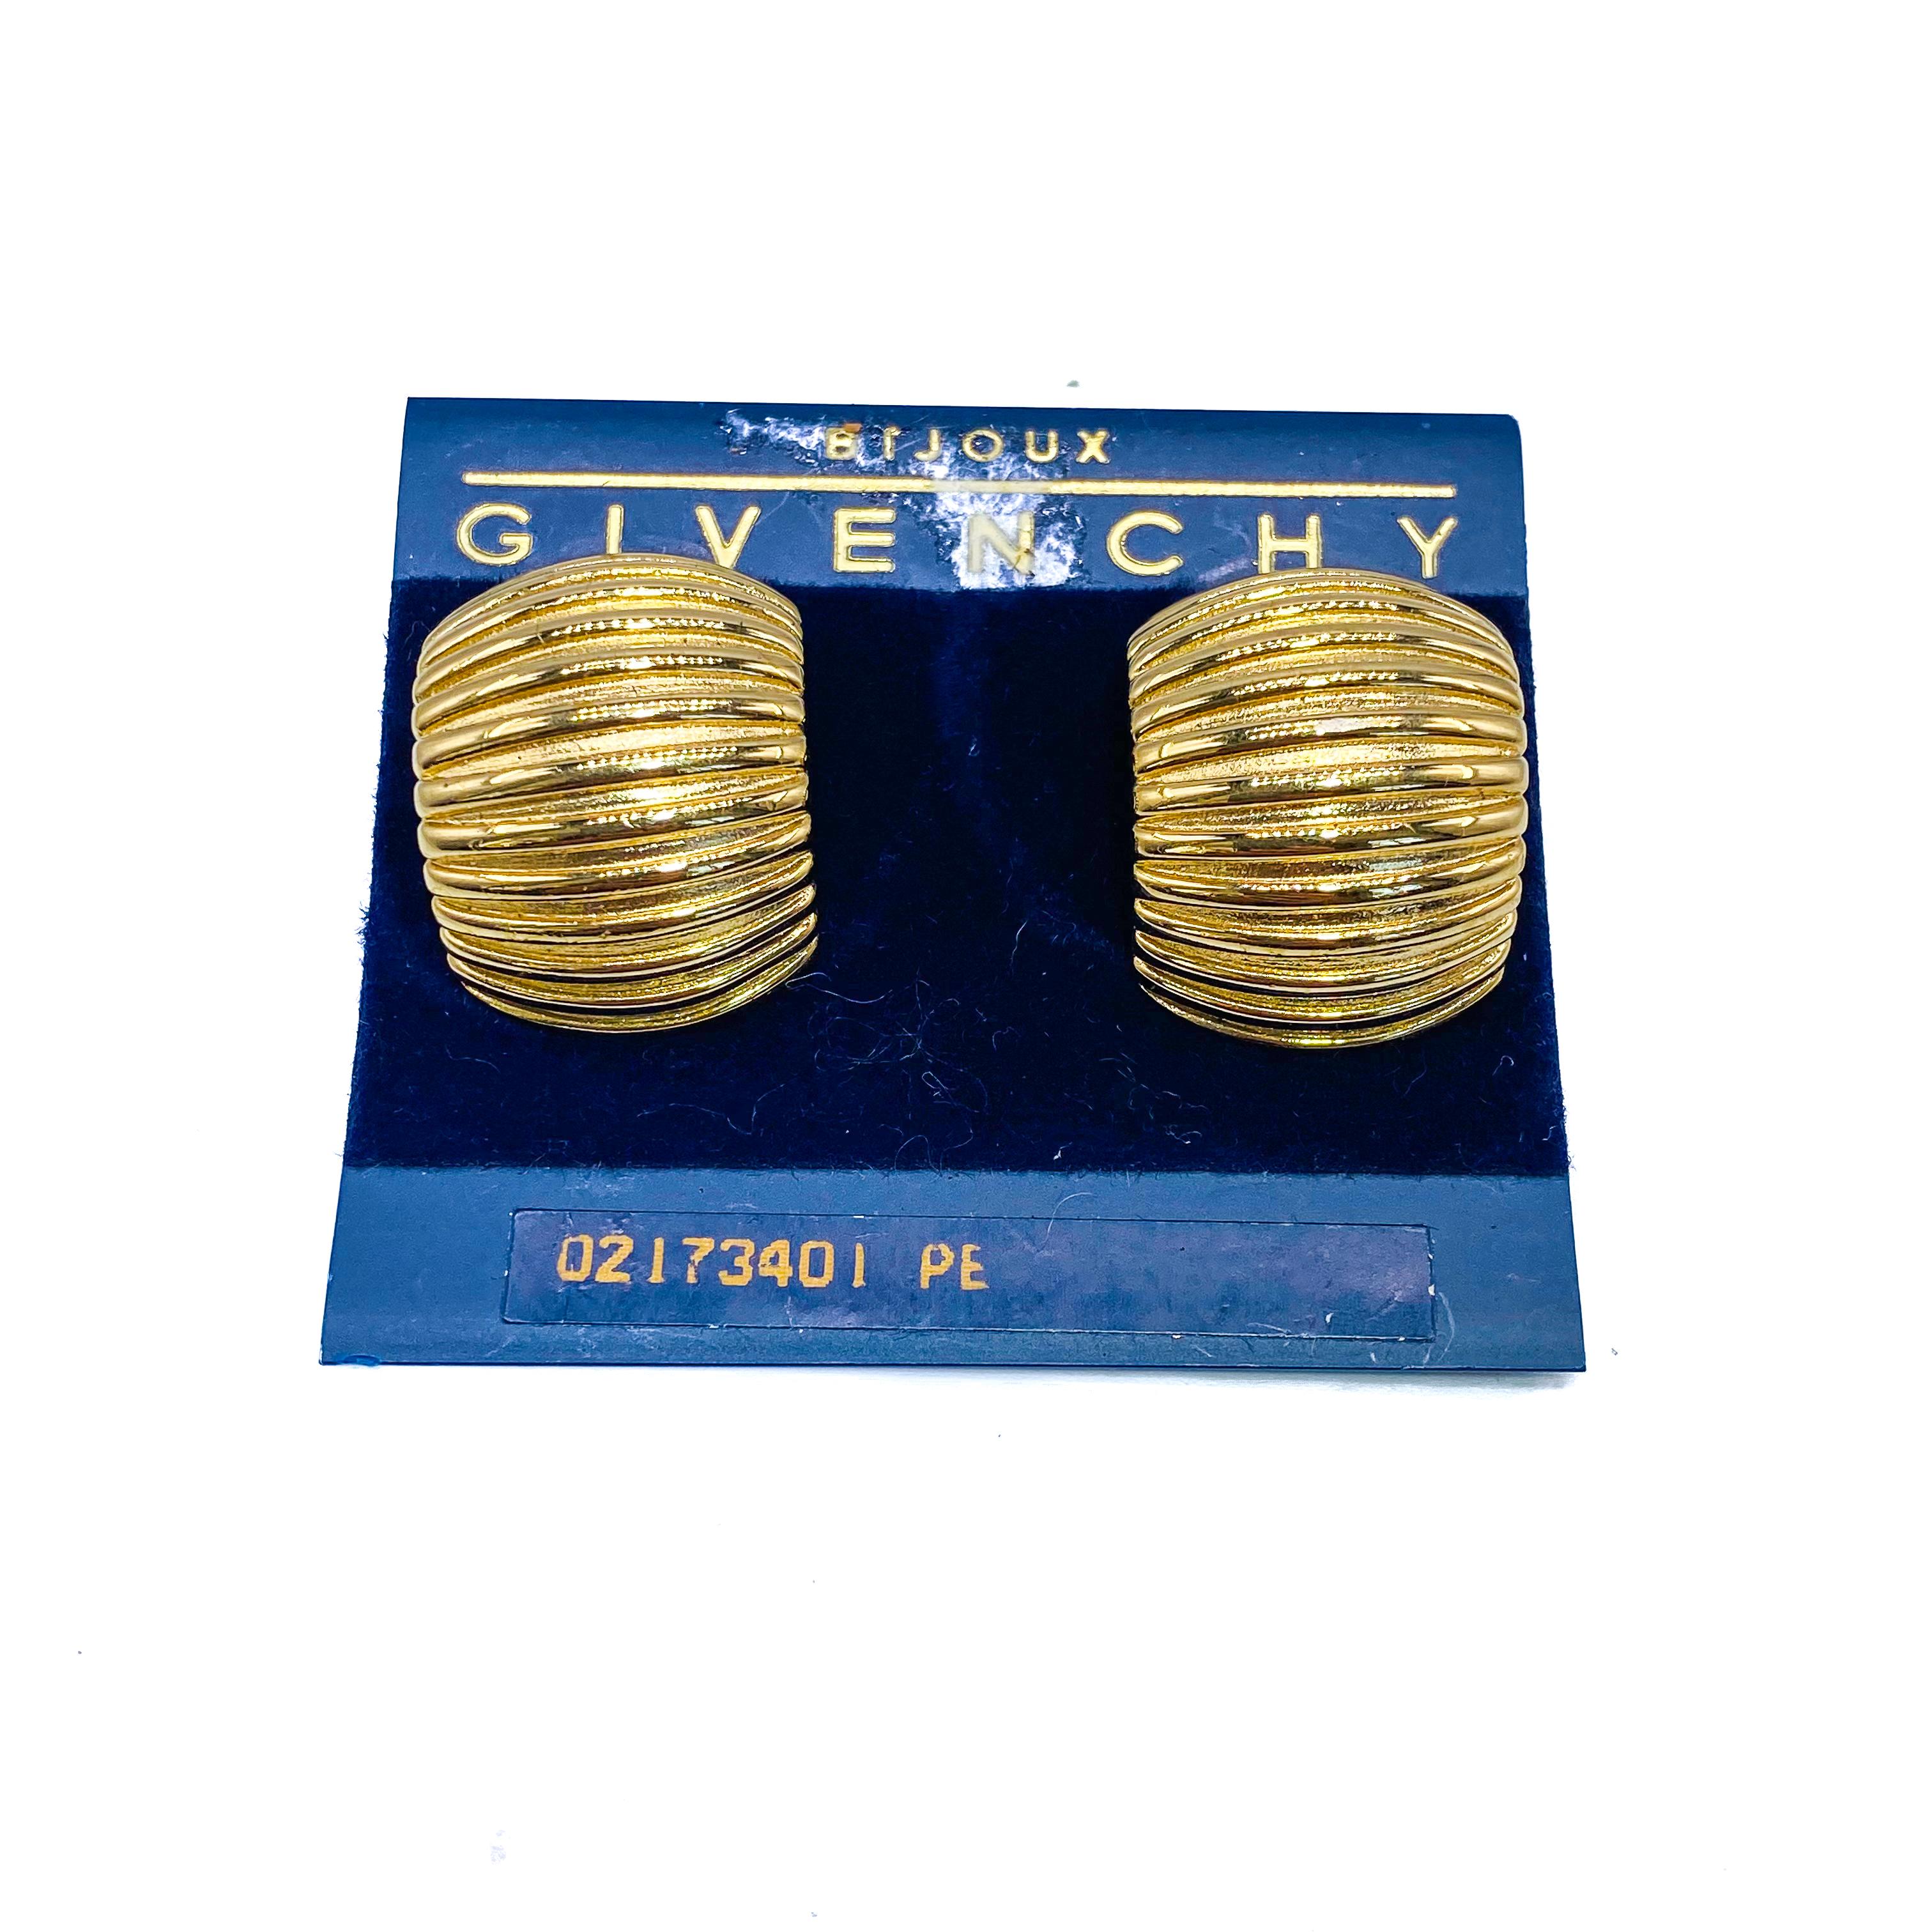 Givenchy 1980s Vintage Earrings for Pierced Ears

Amazing statement earrings in mint condition from the iconic House of Givenchy

Detail
-Made in the 1980s
-Crafted from a ridged gold plated metal
-Half hooped design
-Matching bracelet also